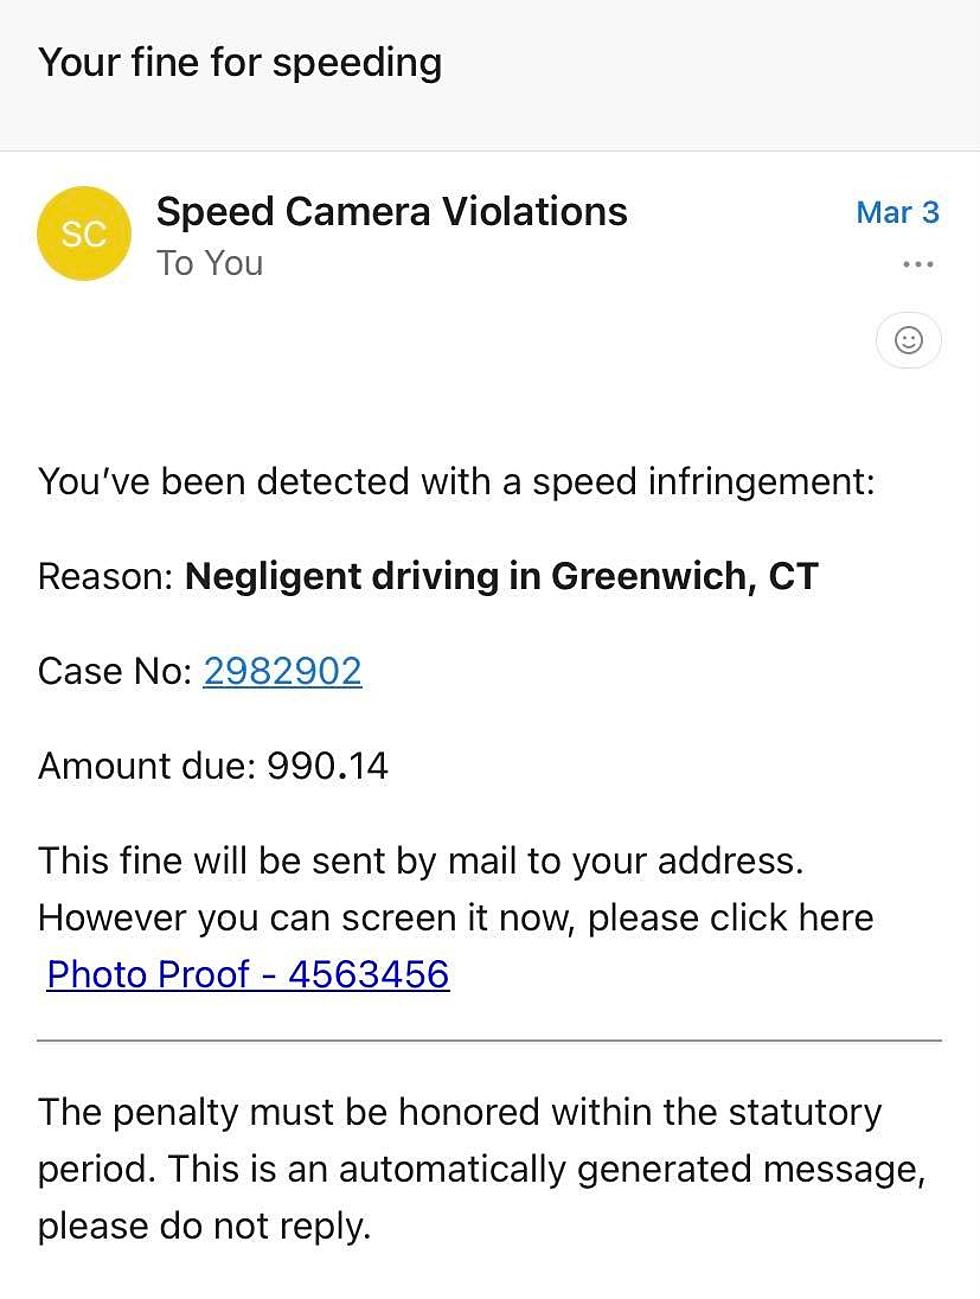 Mainers! Look Out For These New Speeding Email Scams